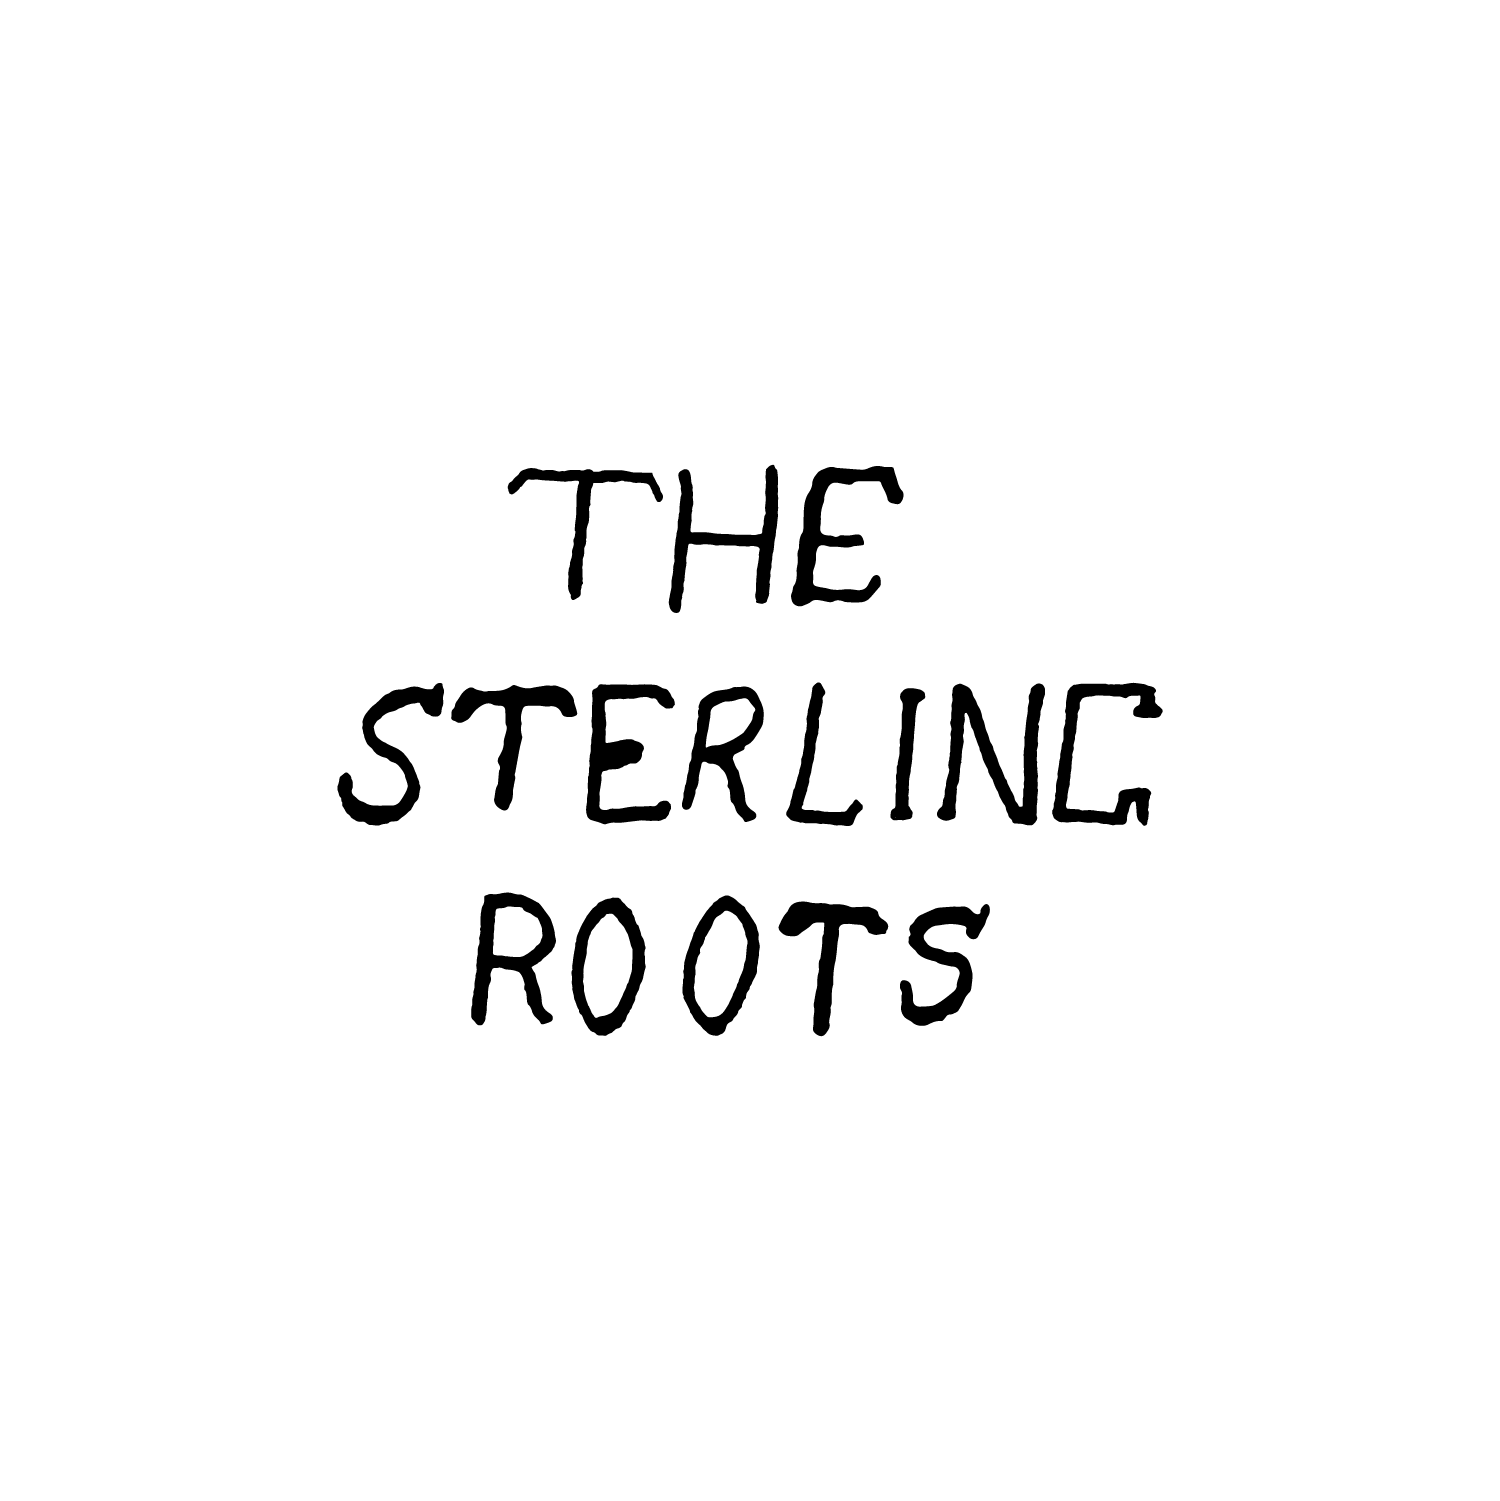 The Sterling Roots logo by OLSON MCINTYRE